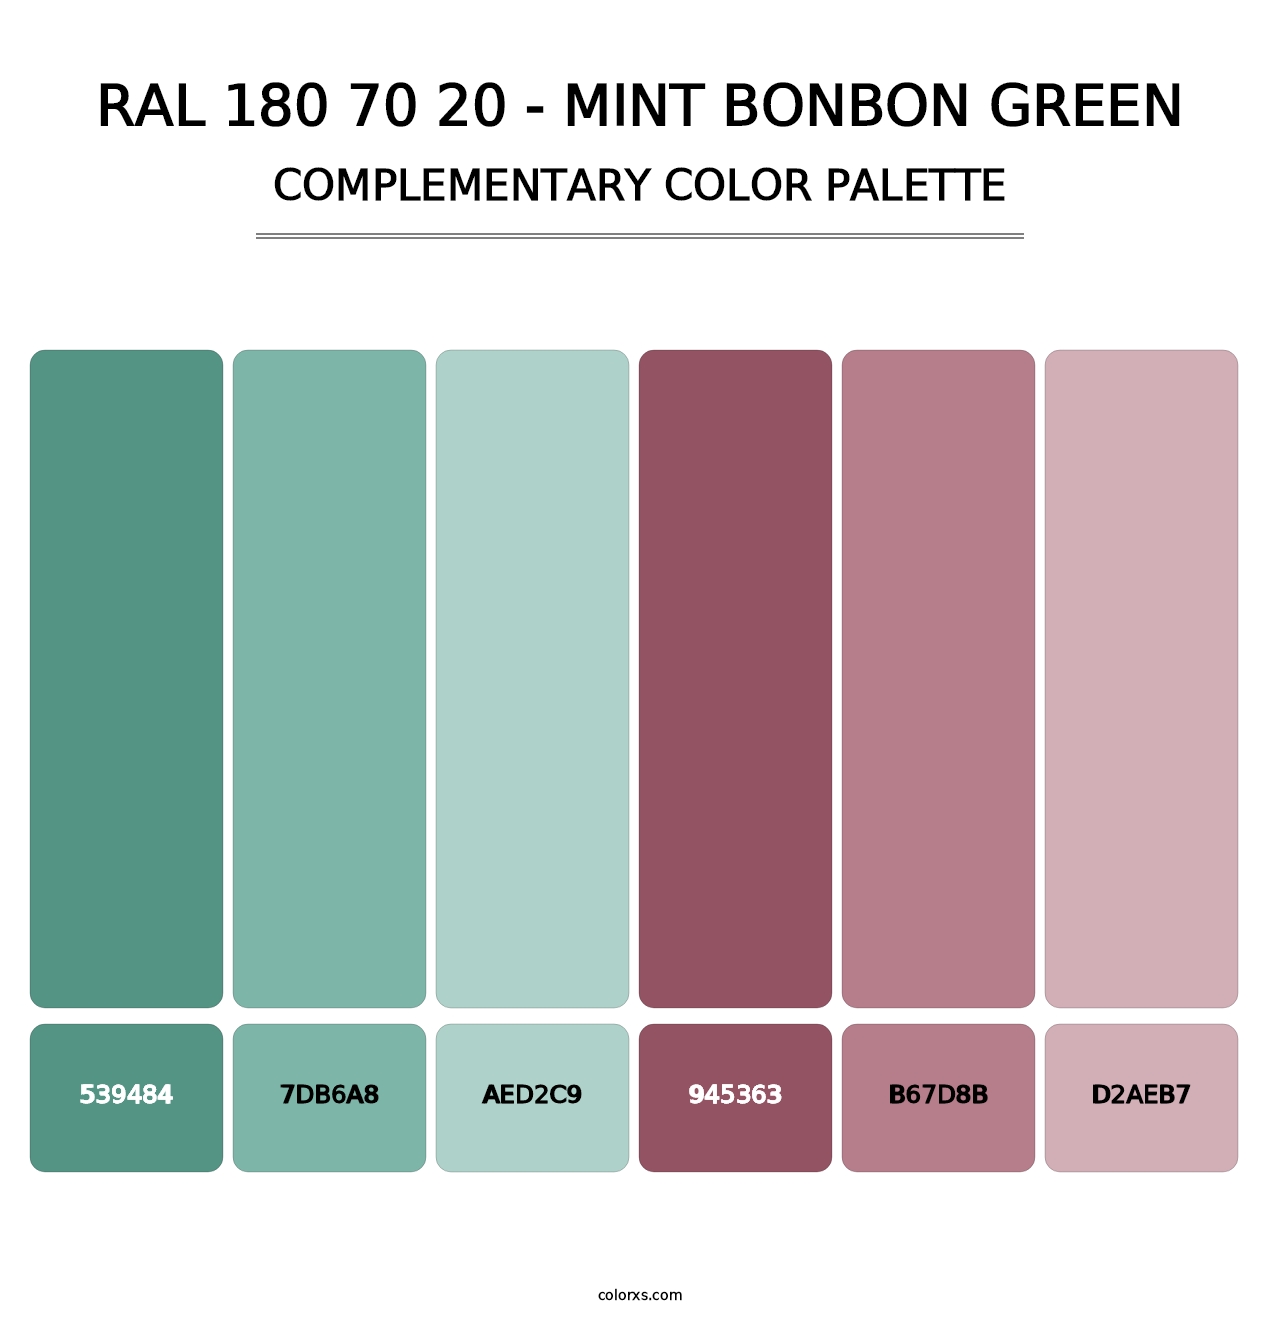 RAL 180 70 20 - Mint Bonbon Green - Complementary Color Palette